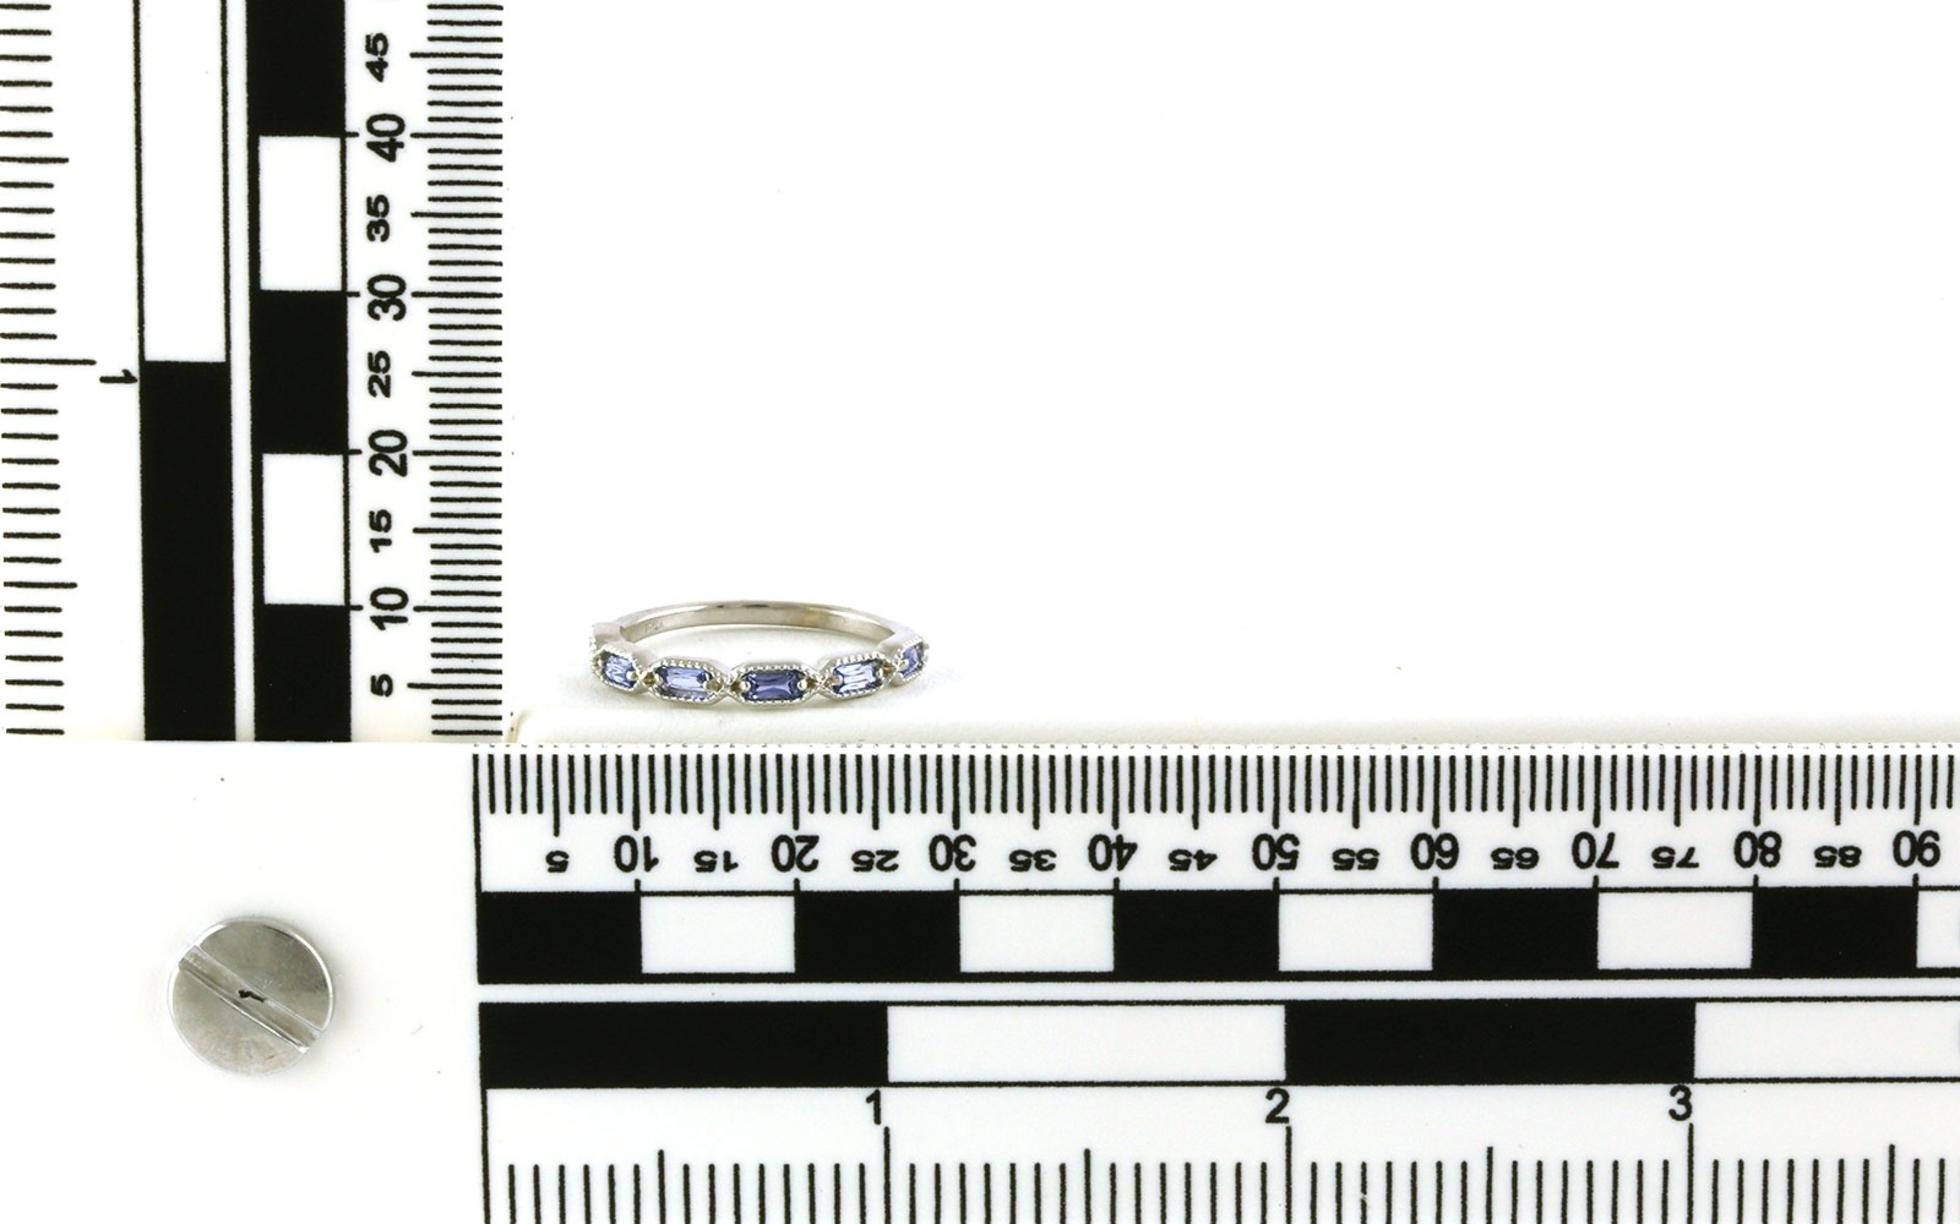 6-Stone Milgrain Hexagonal Ring with Baguette-cut Montana Yogo Sapphires in White Gold (0.35cts TWT) Scale